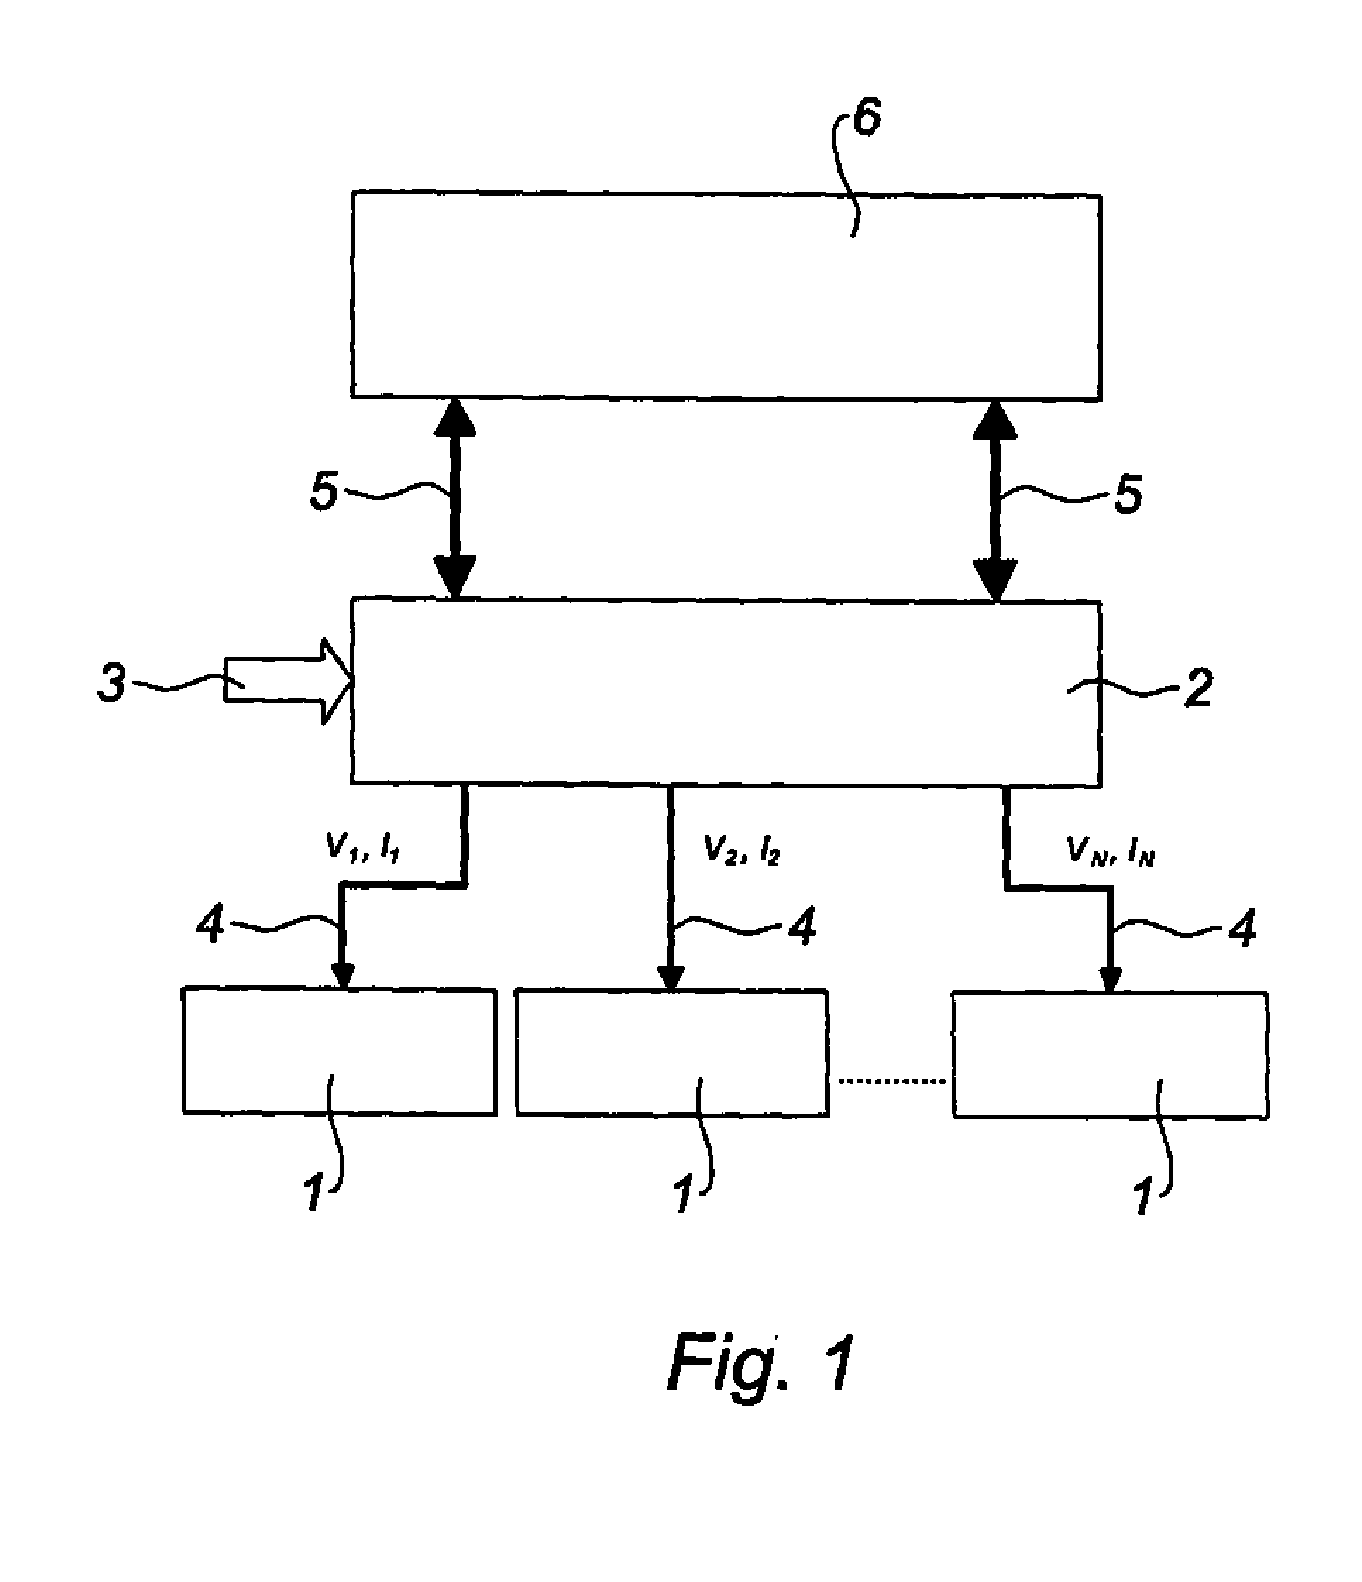 Electric de-icing device and related monitoring system